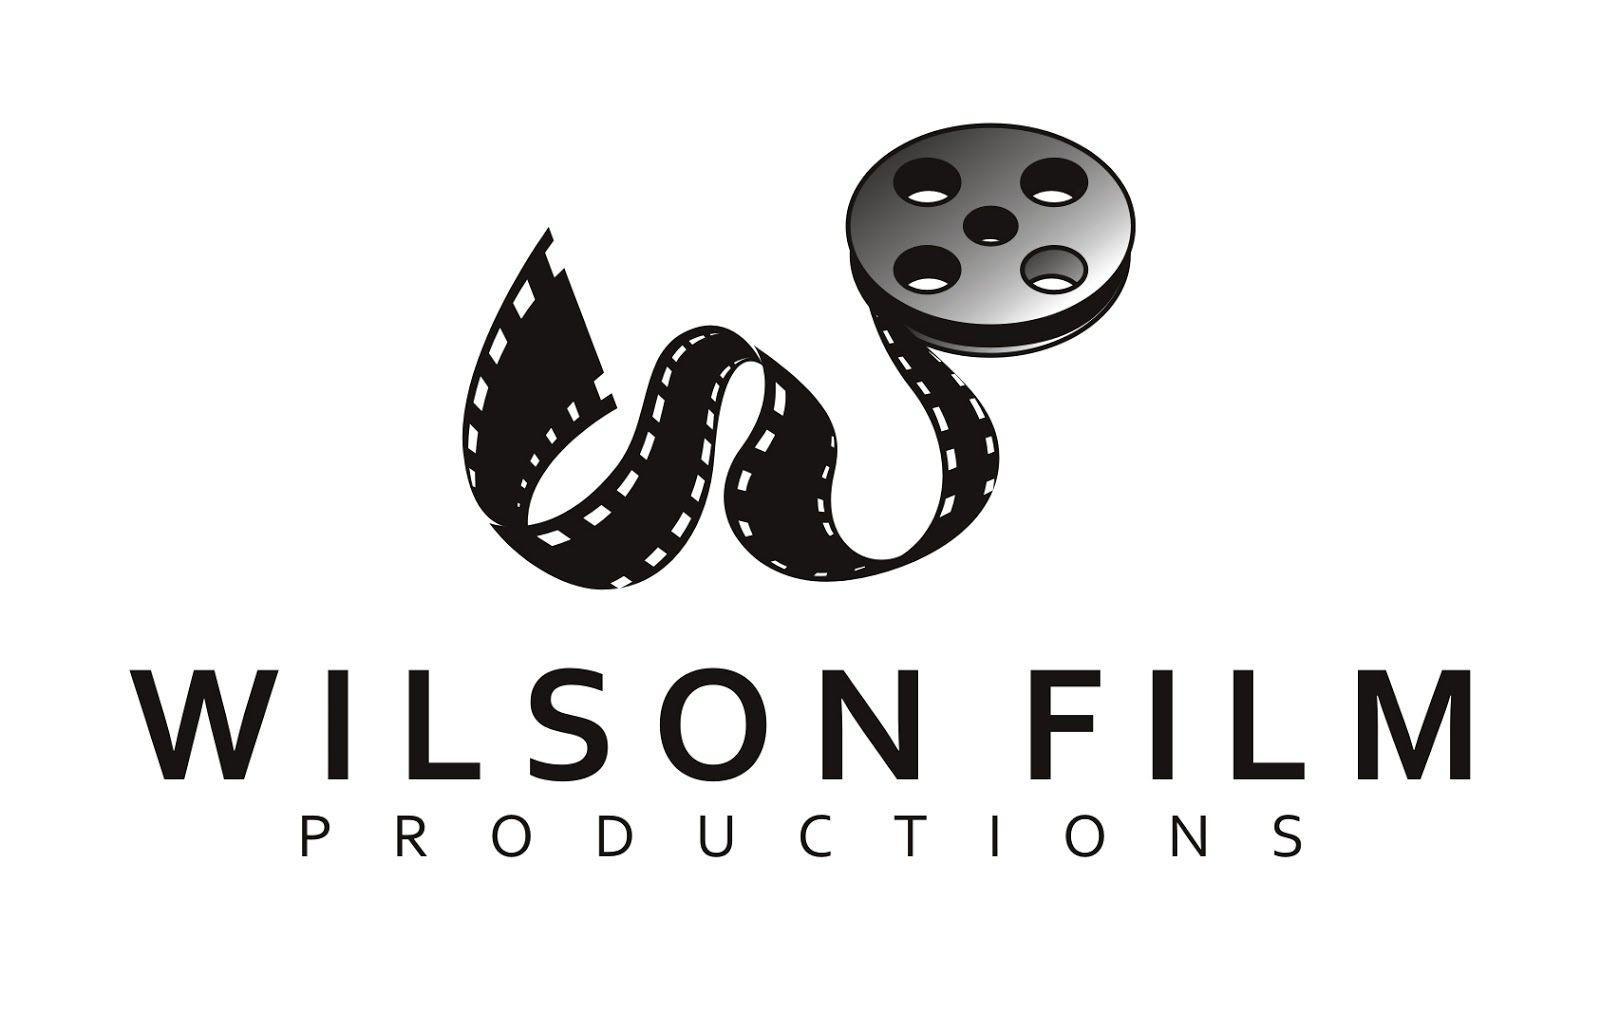 Movie Production Logo - WGS Group One: Logo Research Ideas